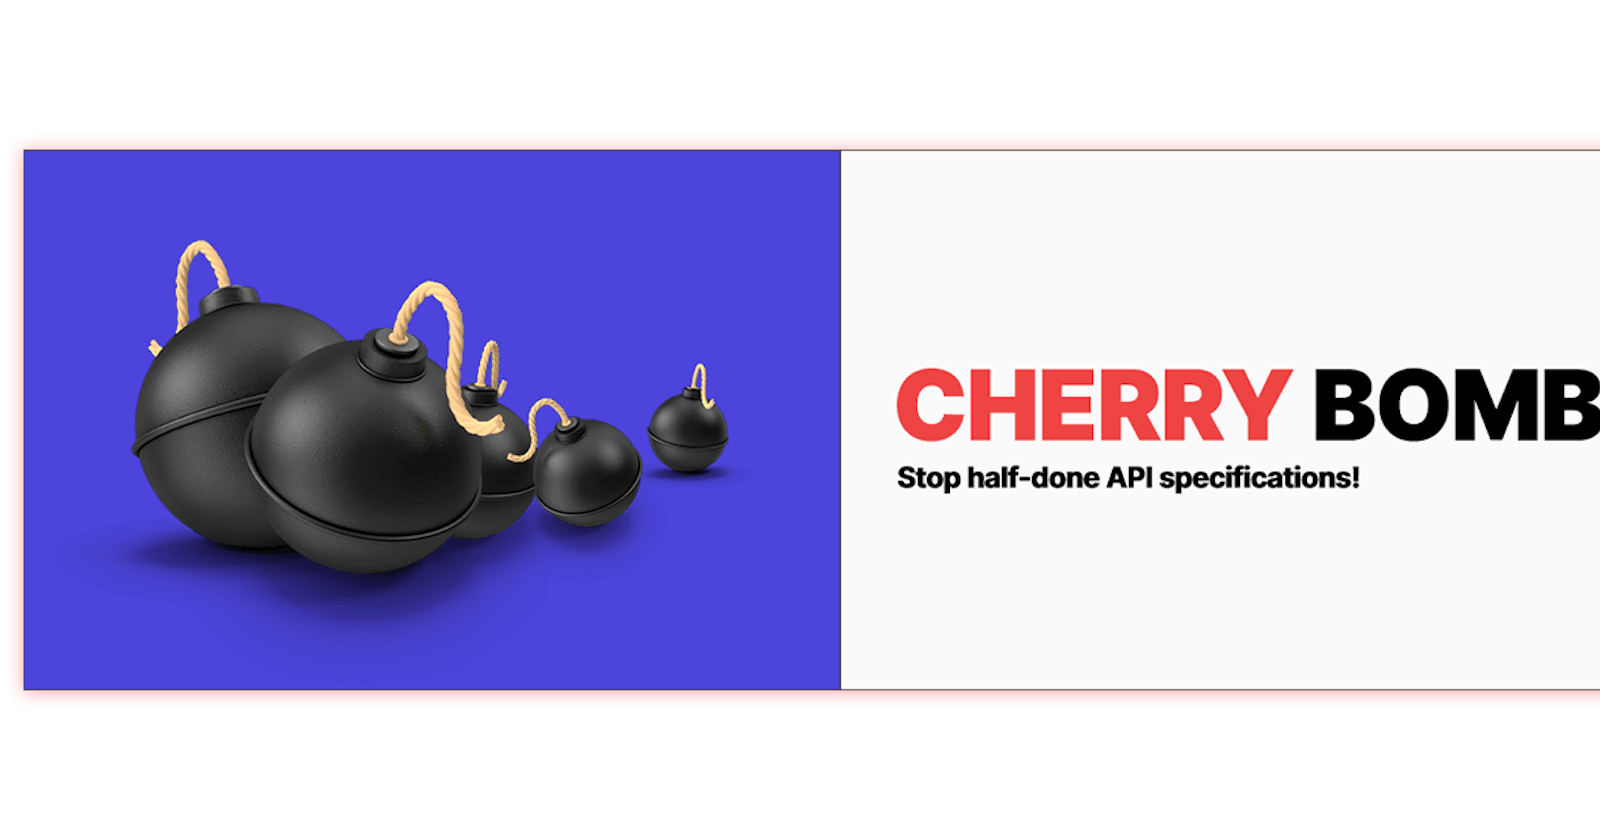 Stay calm, your APIs are secure with CherryBomb !